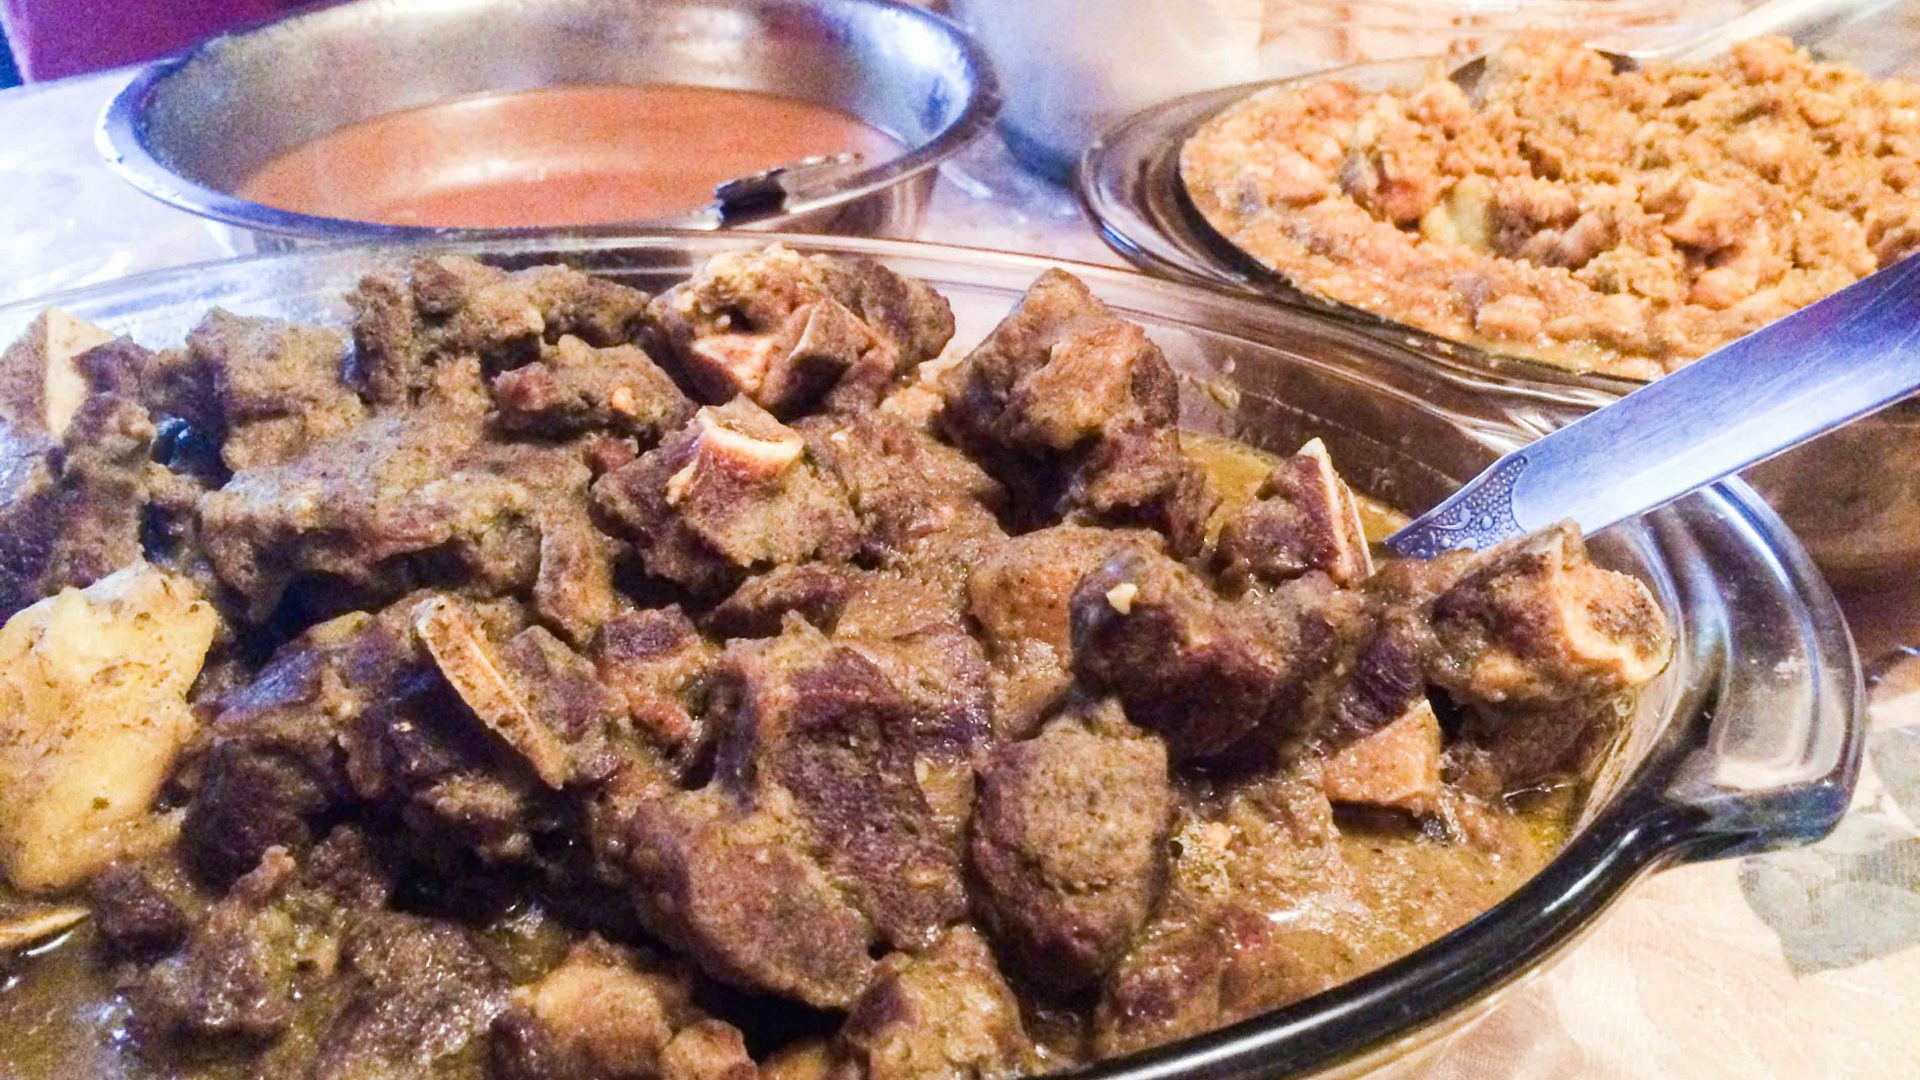 Trini curry goat chana is served with aloo dahl and roti in South Ozone Park, Queens.